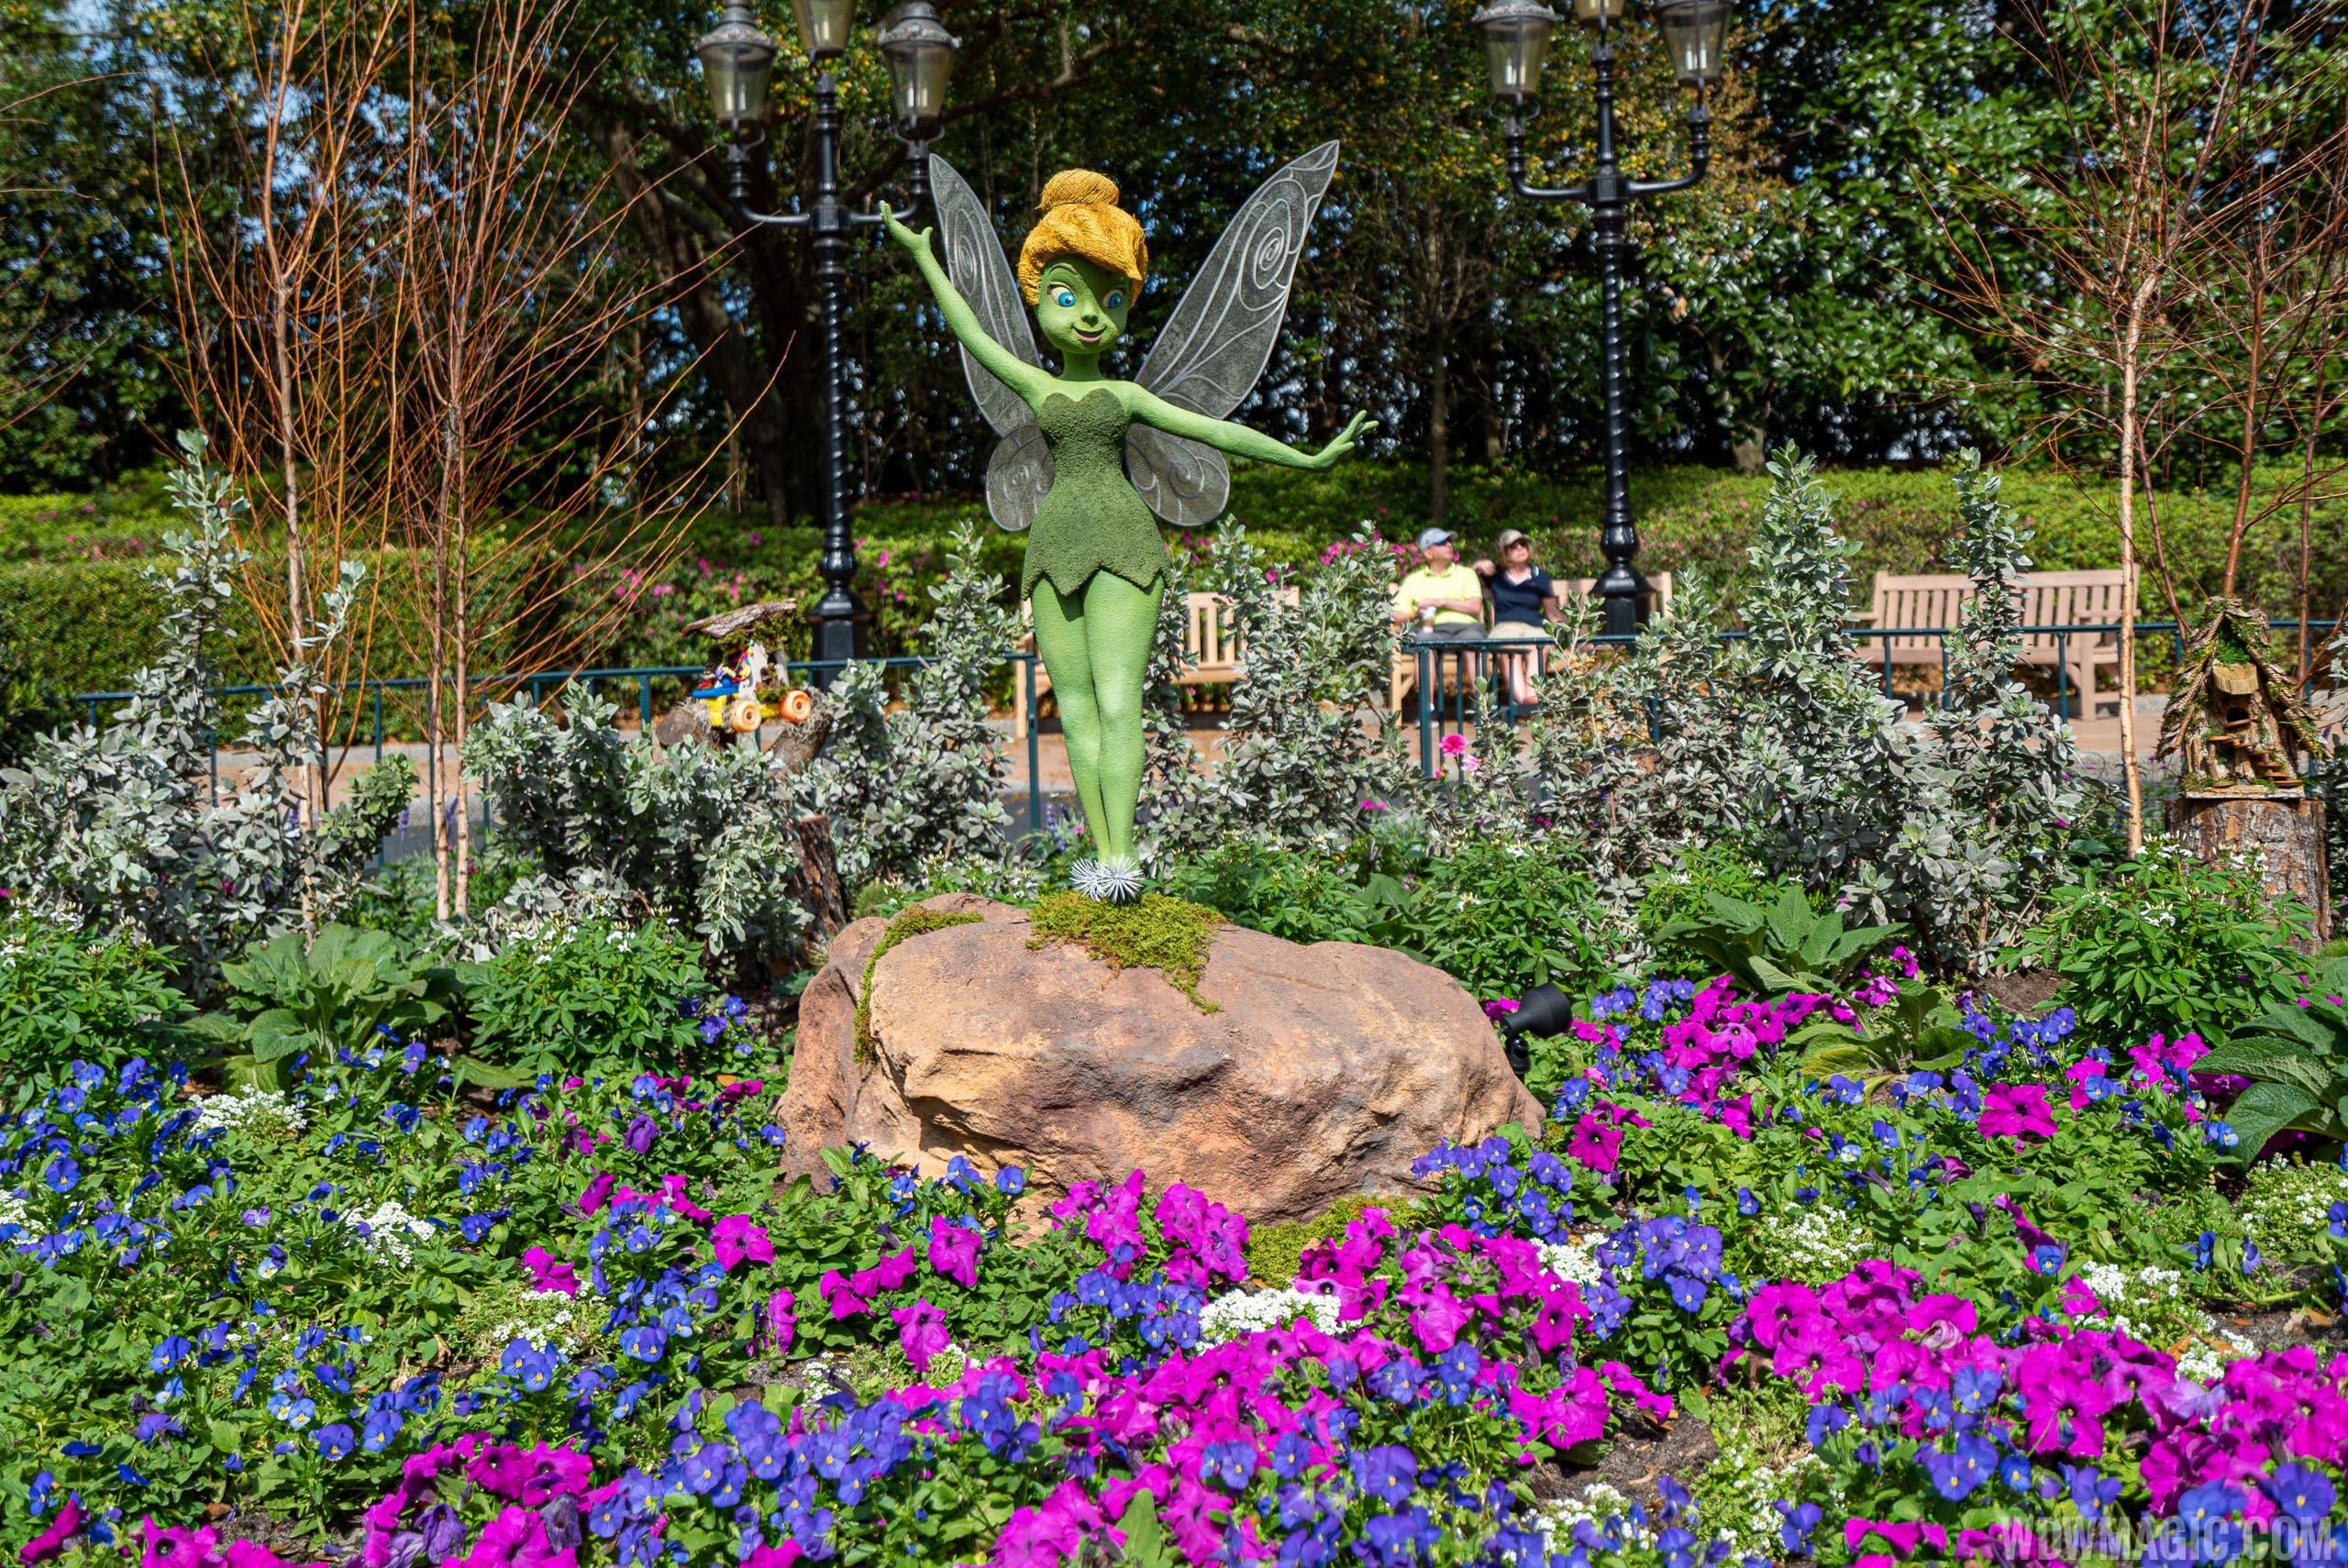 2020 Epcot International Flower and Garden Festival topiary tour